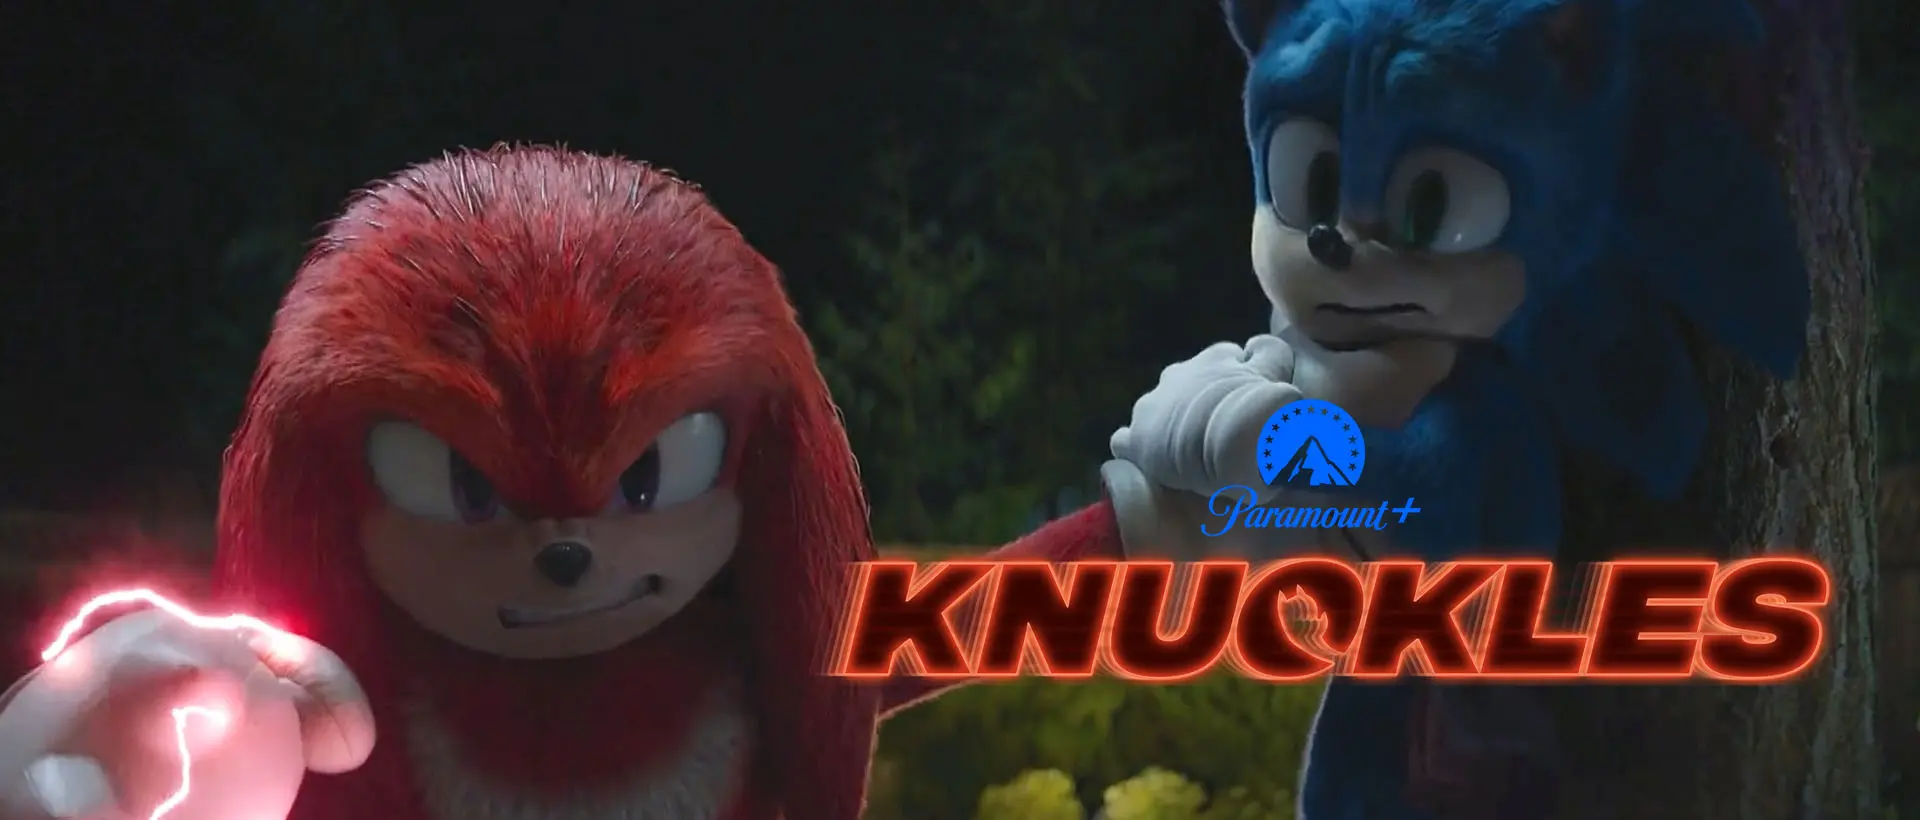 knuckles series paramount plus banner